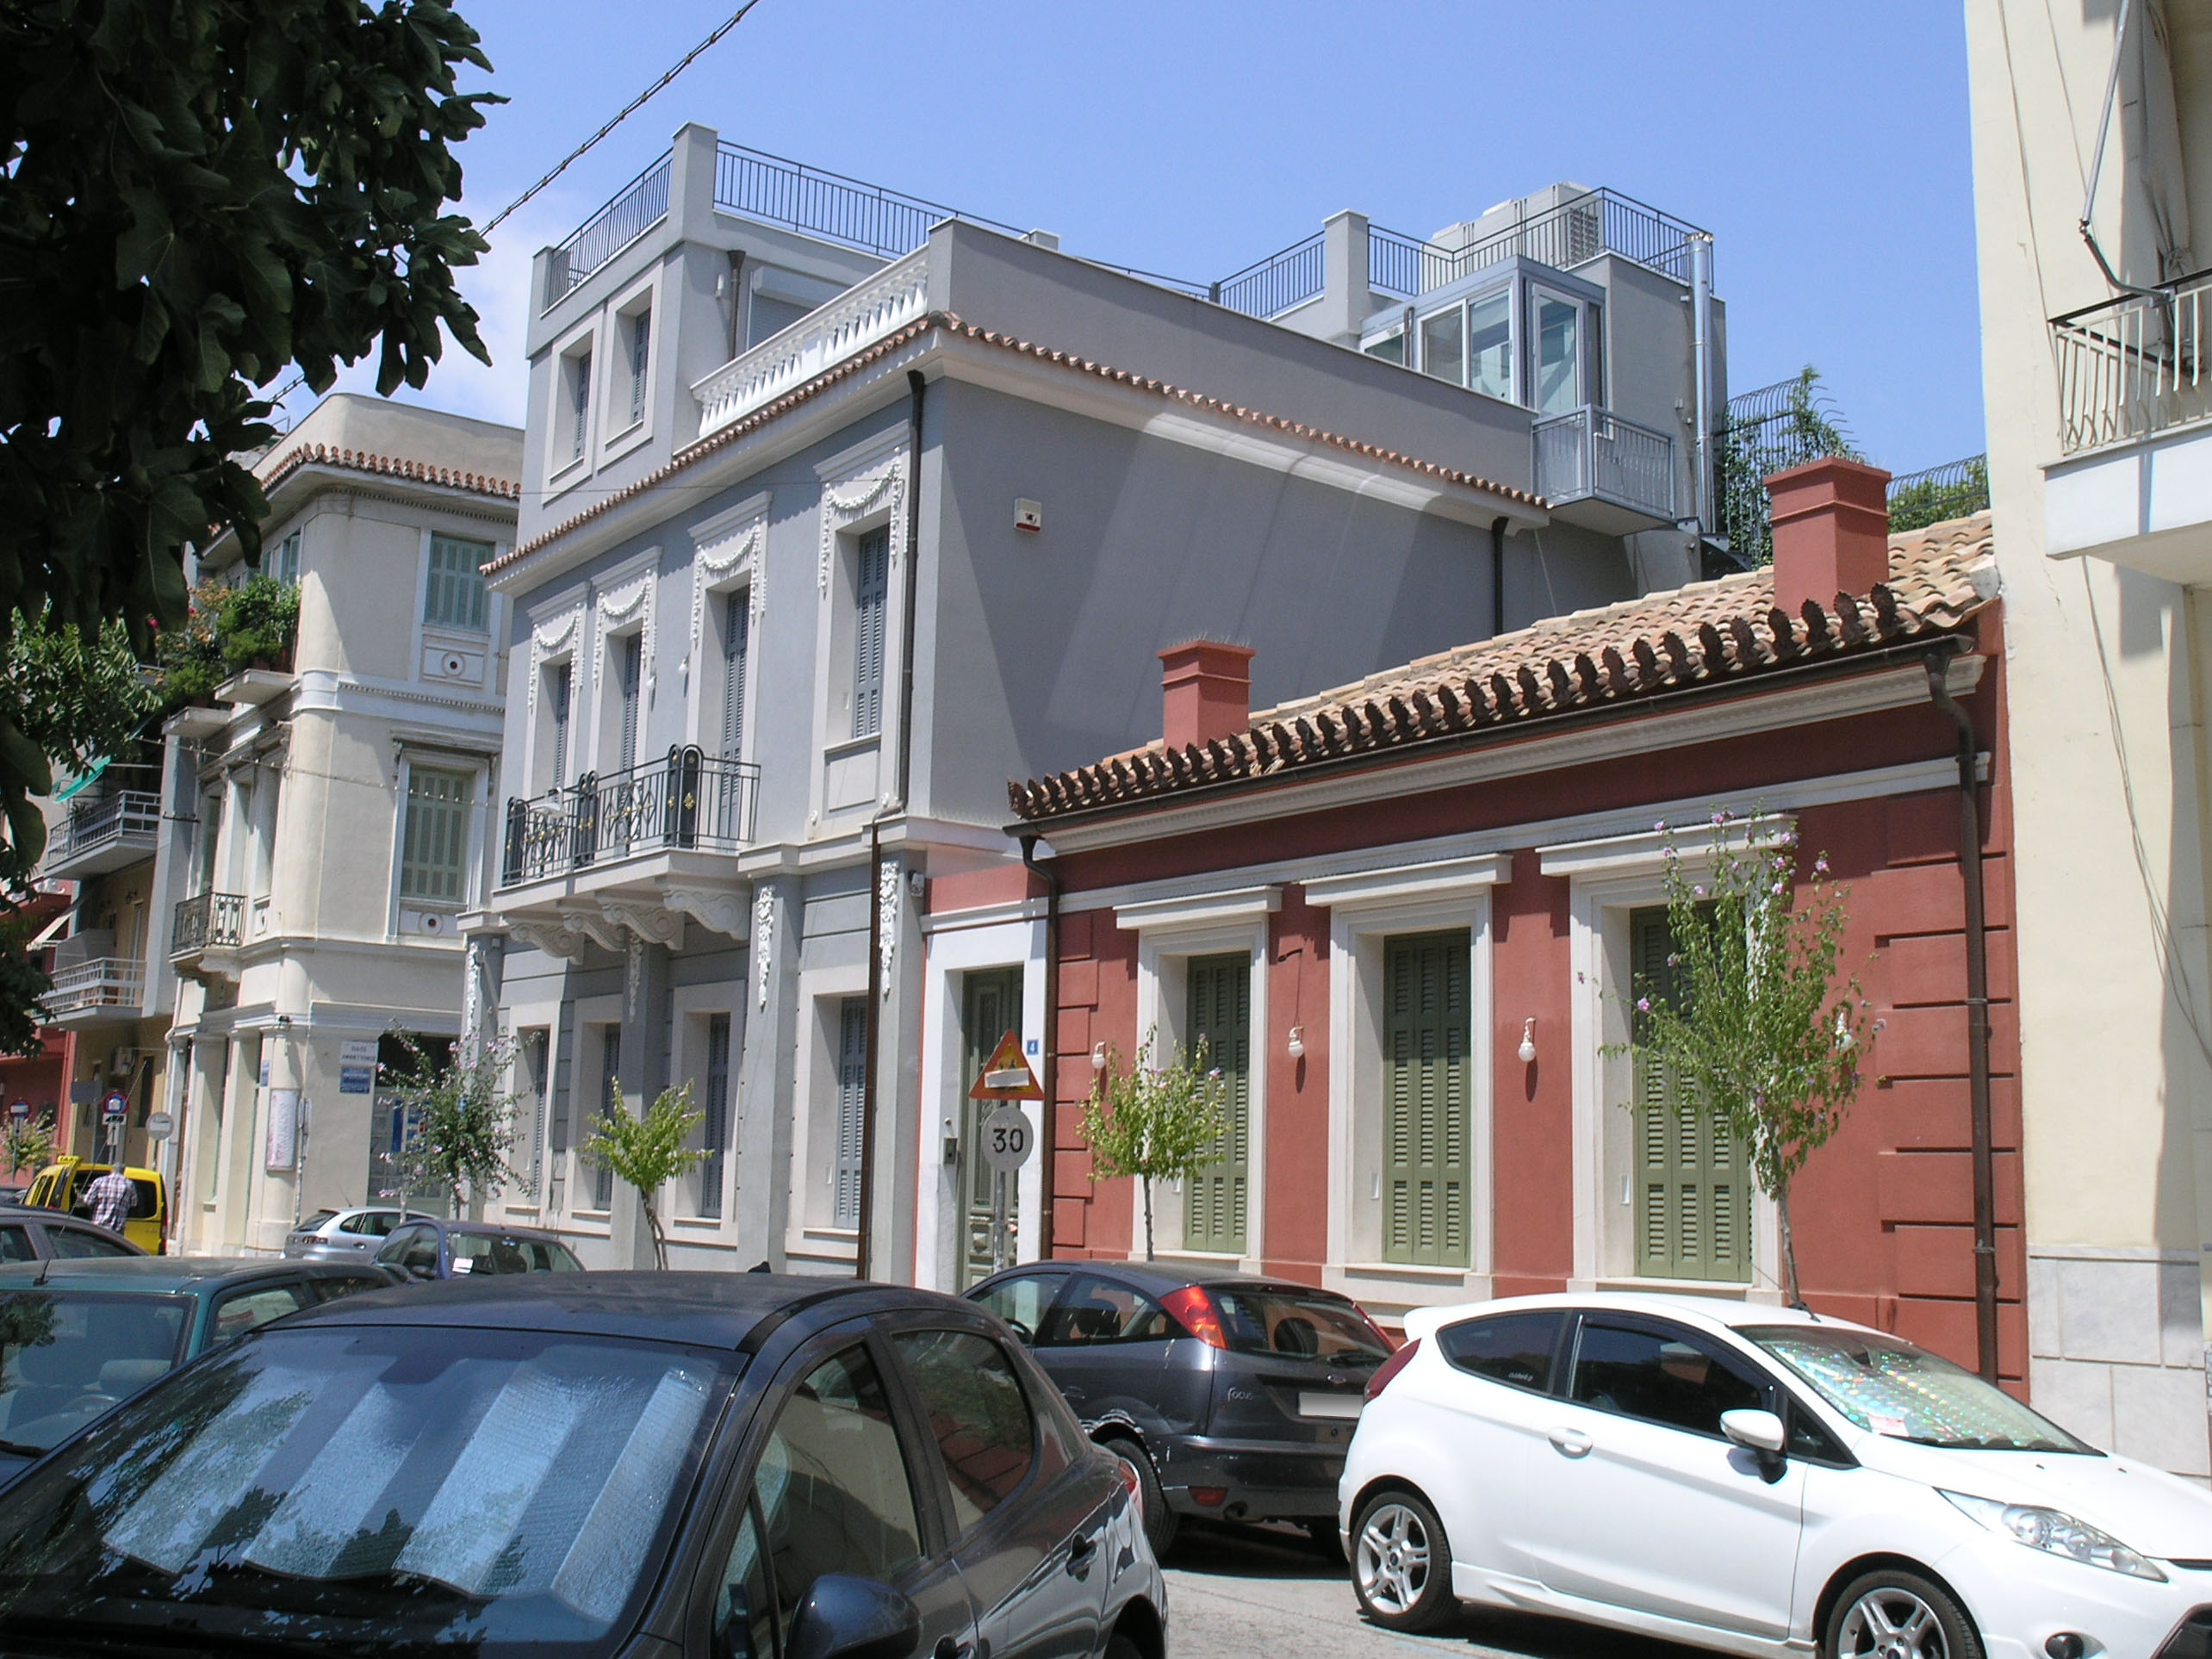 General view of buildings from Poulopoulou Ilia str.